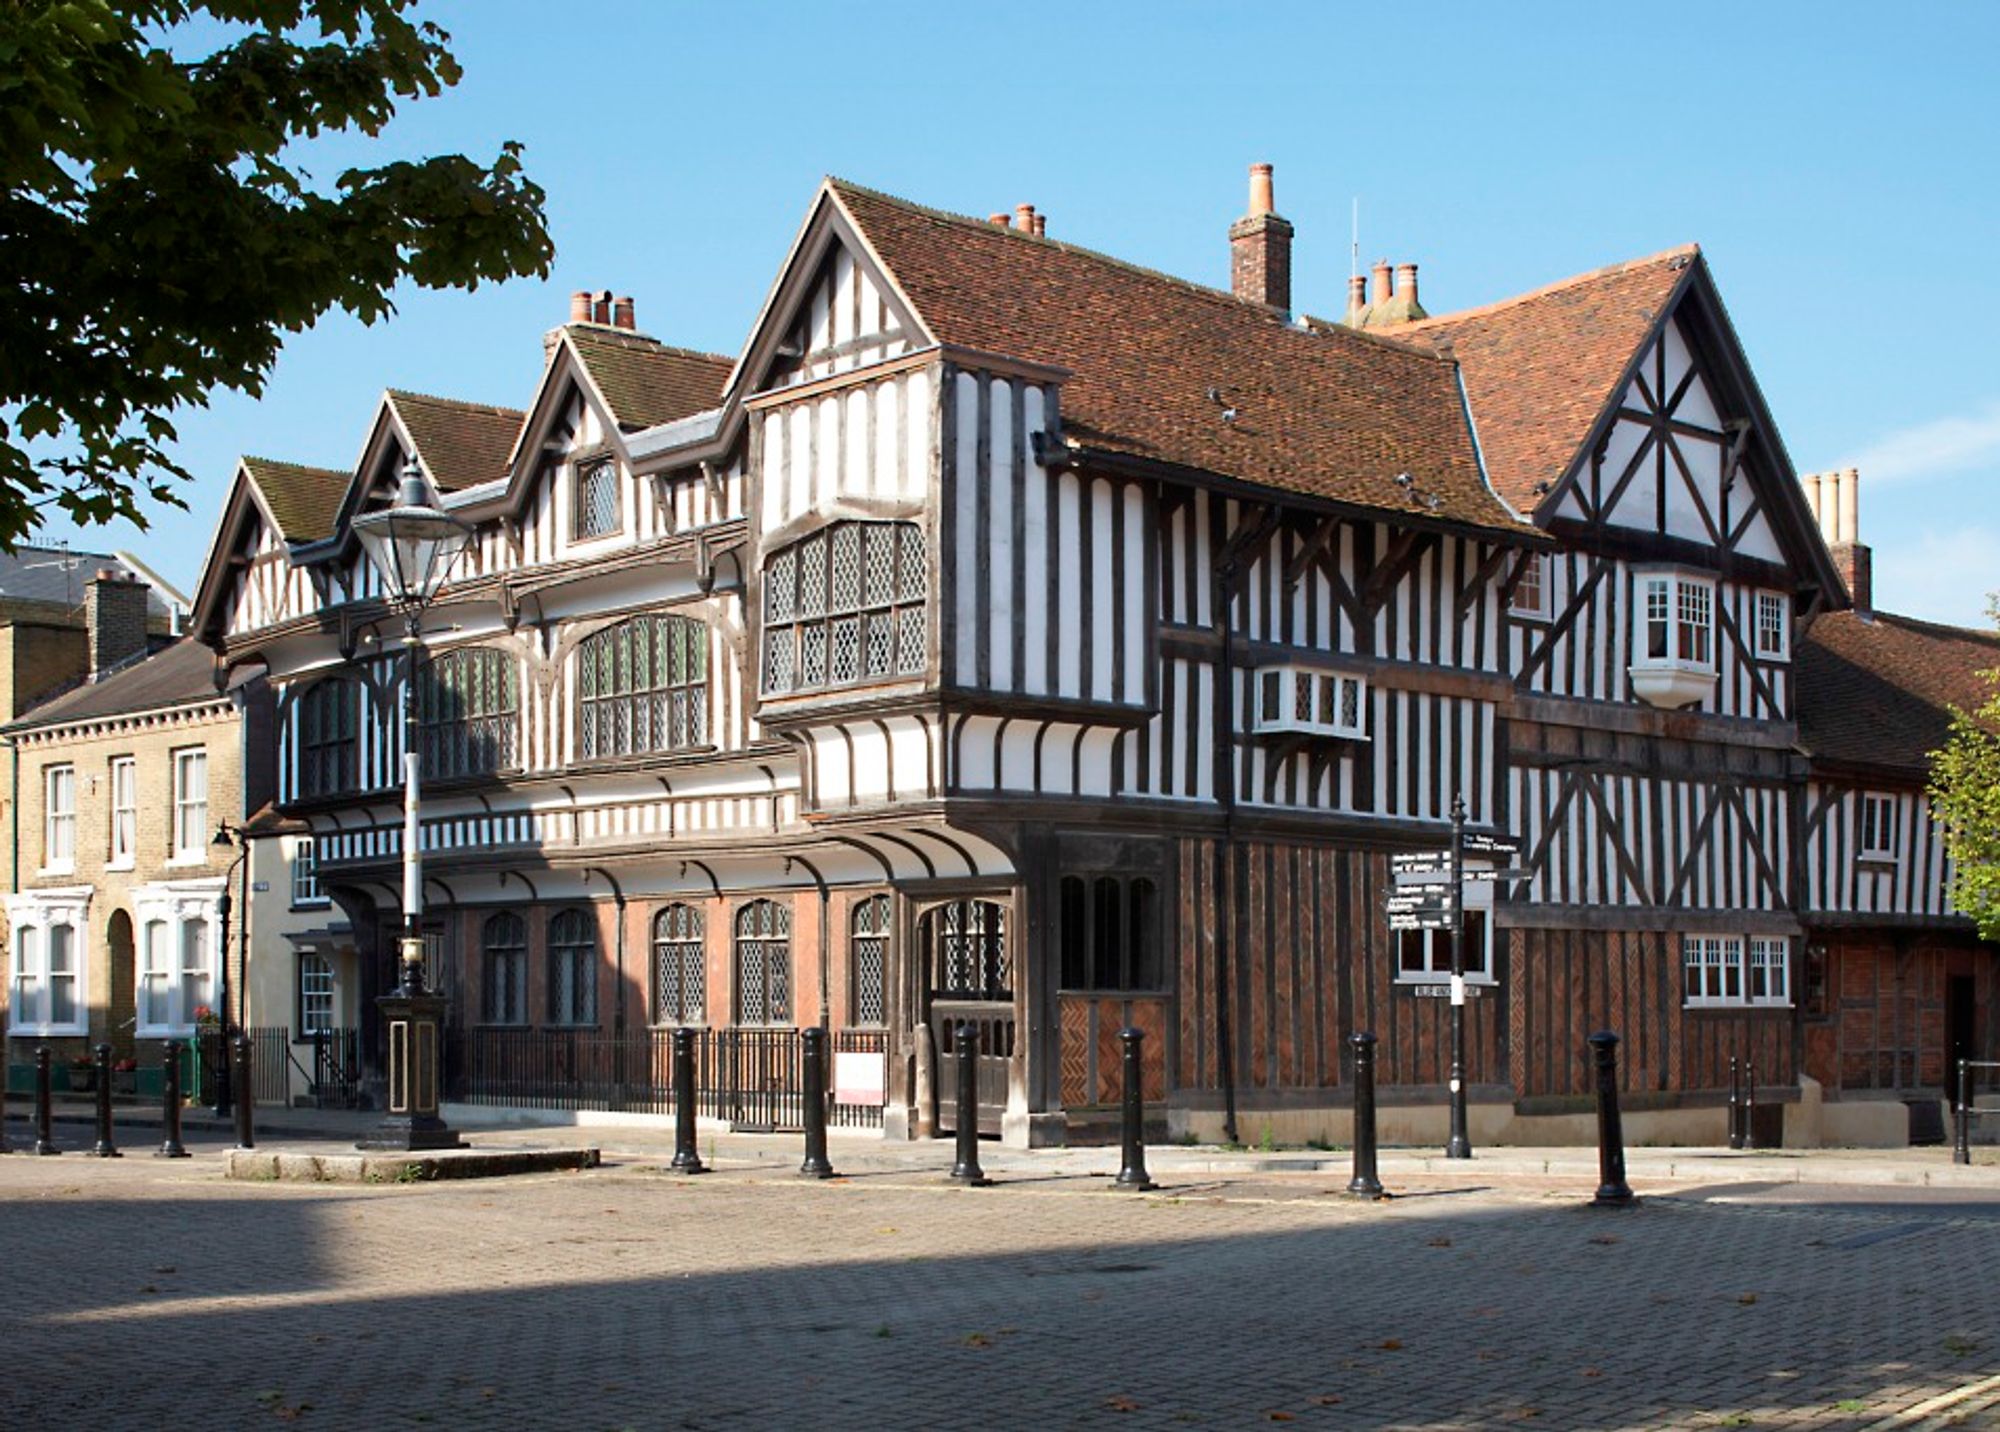 A medieval timber-framed Tudor-style building preserved through the help of historic building specialist structural engineers. 